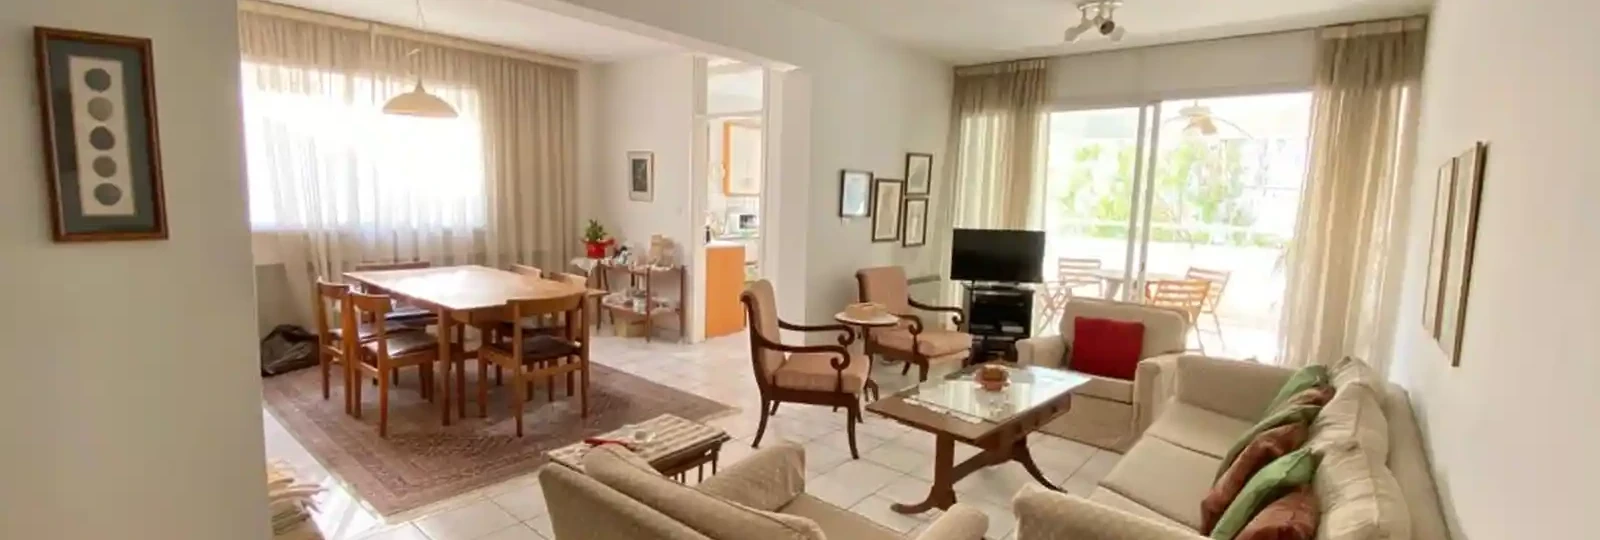 3-bedroom apartment fоr sаle €179.000, image 1